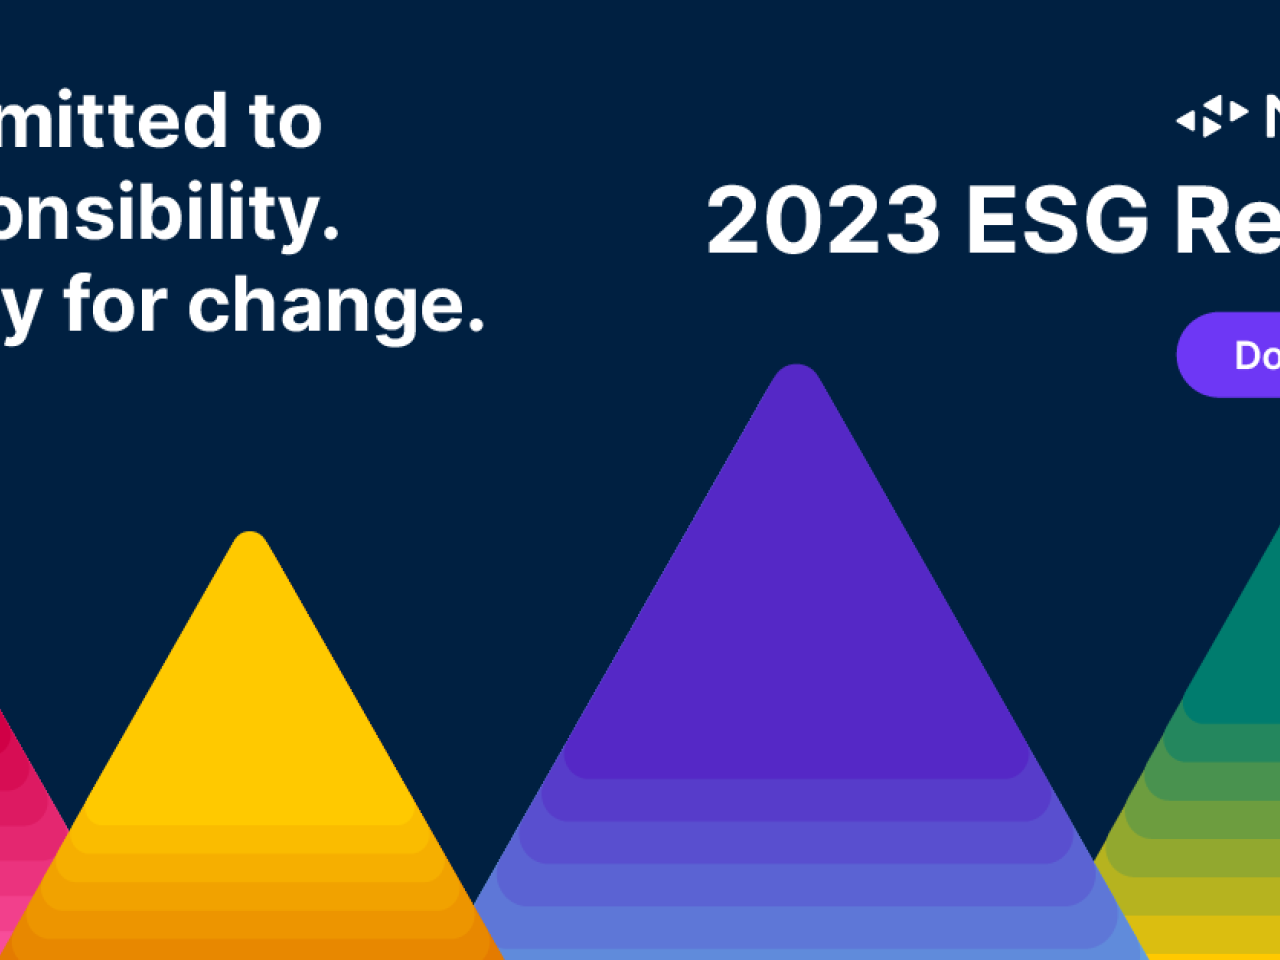 "Committed to responsibility. Ready for change. 2023 ESG Report"